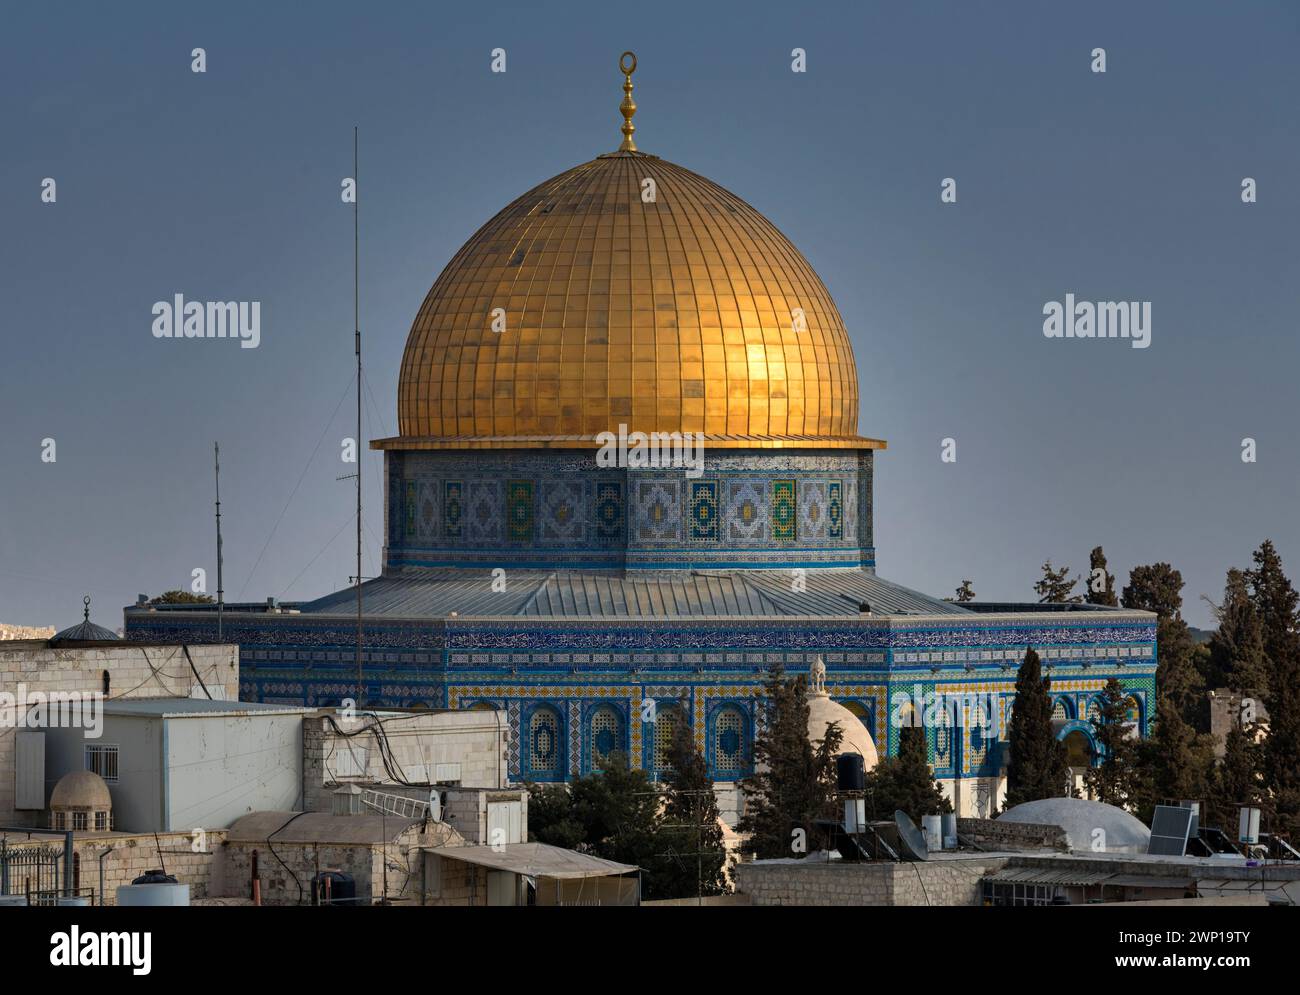 The Dome of the rock, The Temple Mount, Jerusalem, old town, Israel Stock Photo